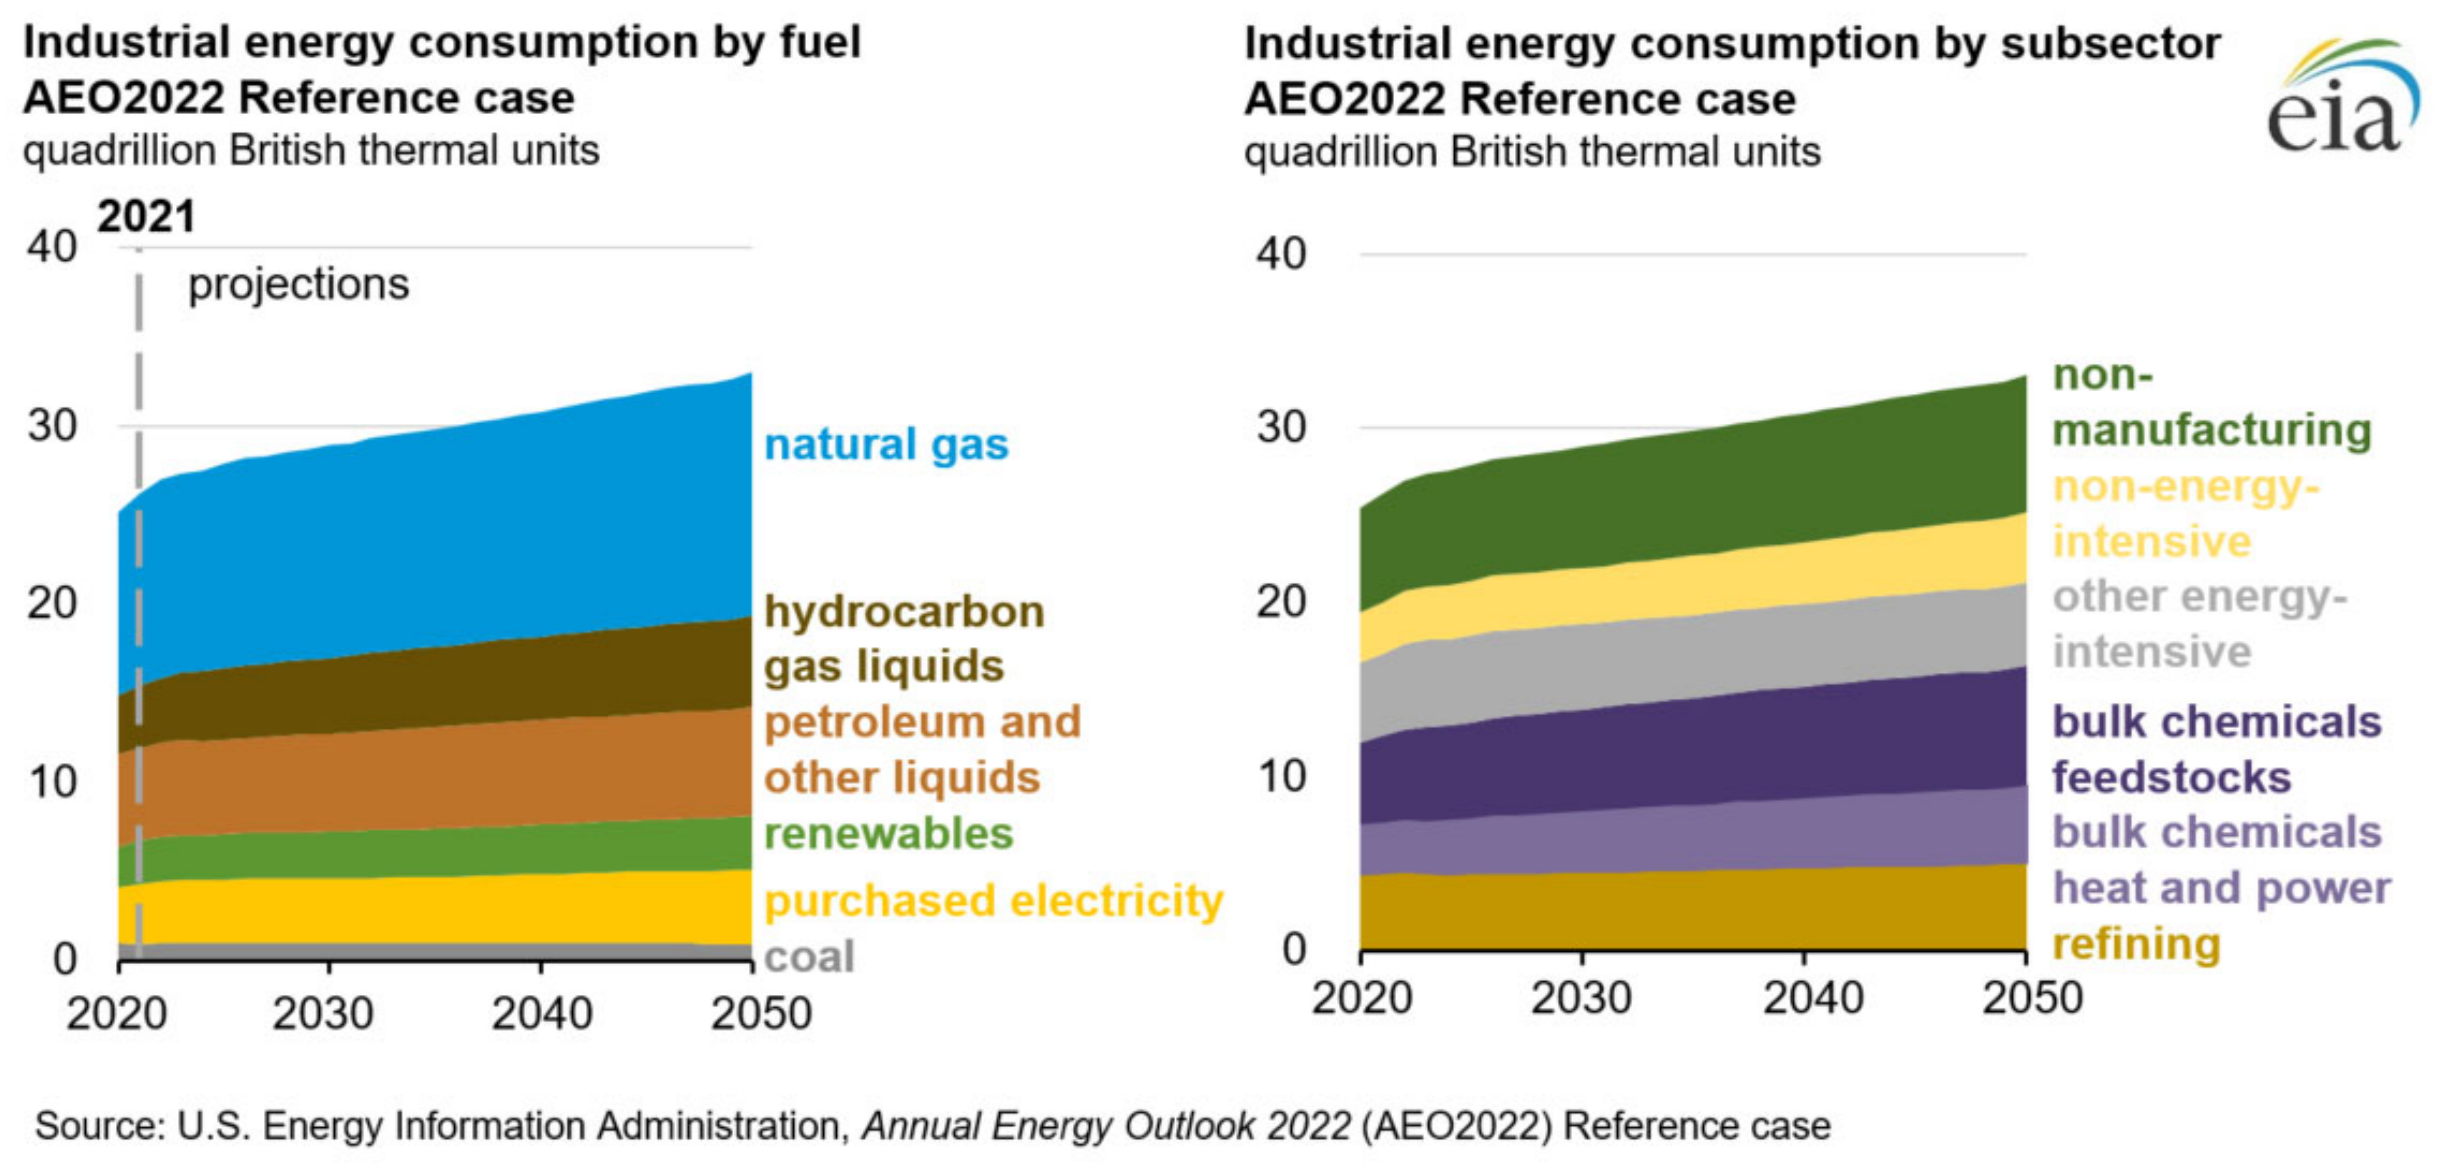 Projected U.S. industrial energy consumption by fuel in the AEO2022 reference case (left) and industrial energy consumption by subsector (right). Graphic: EIA